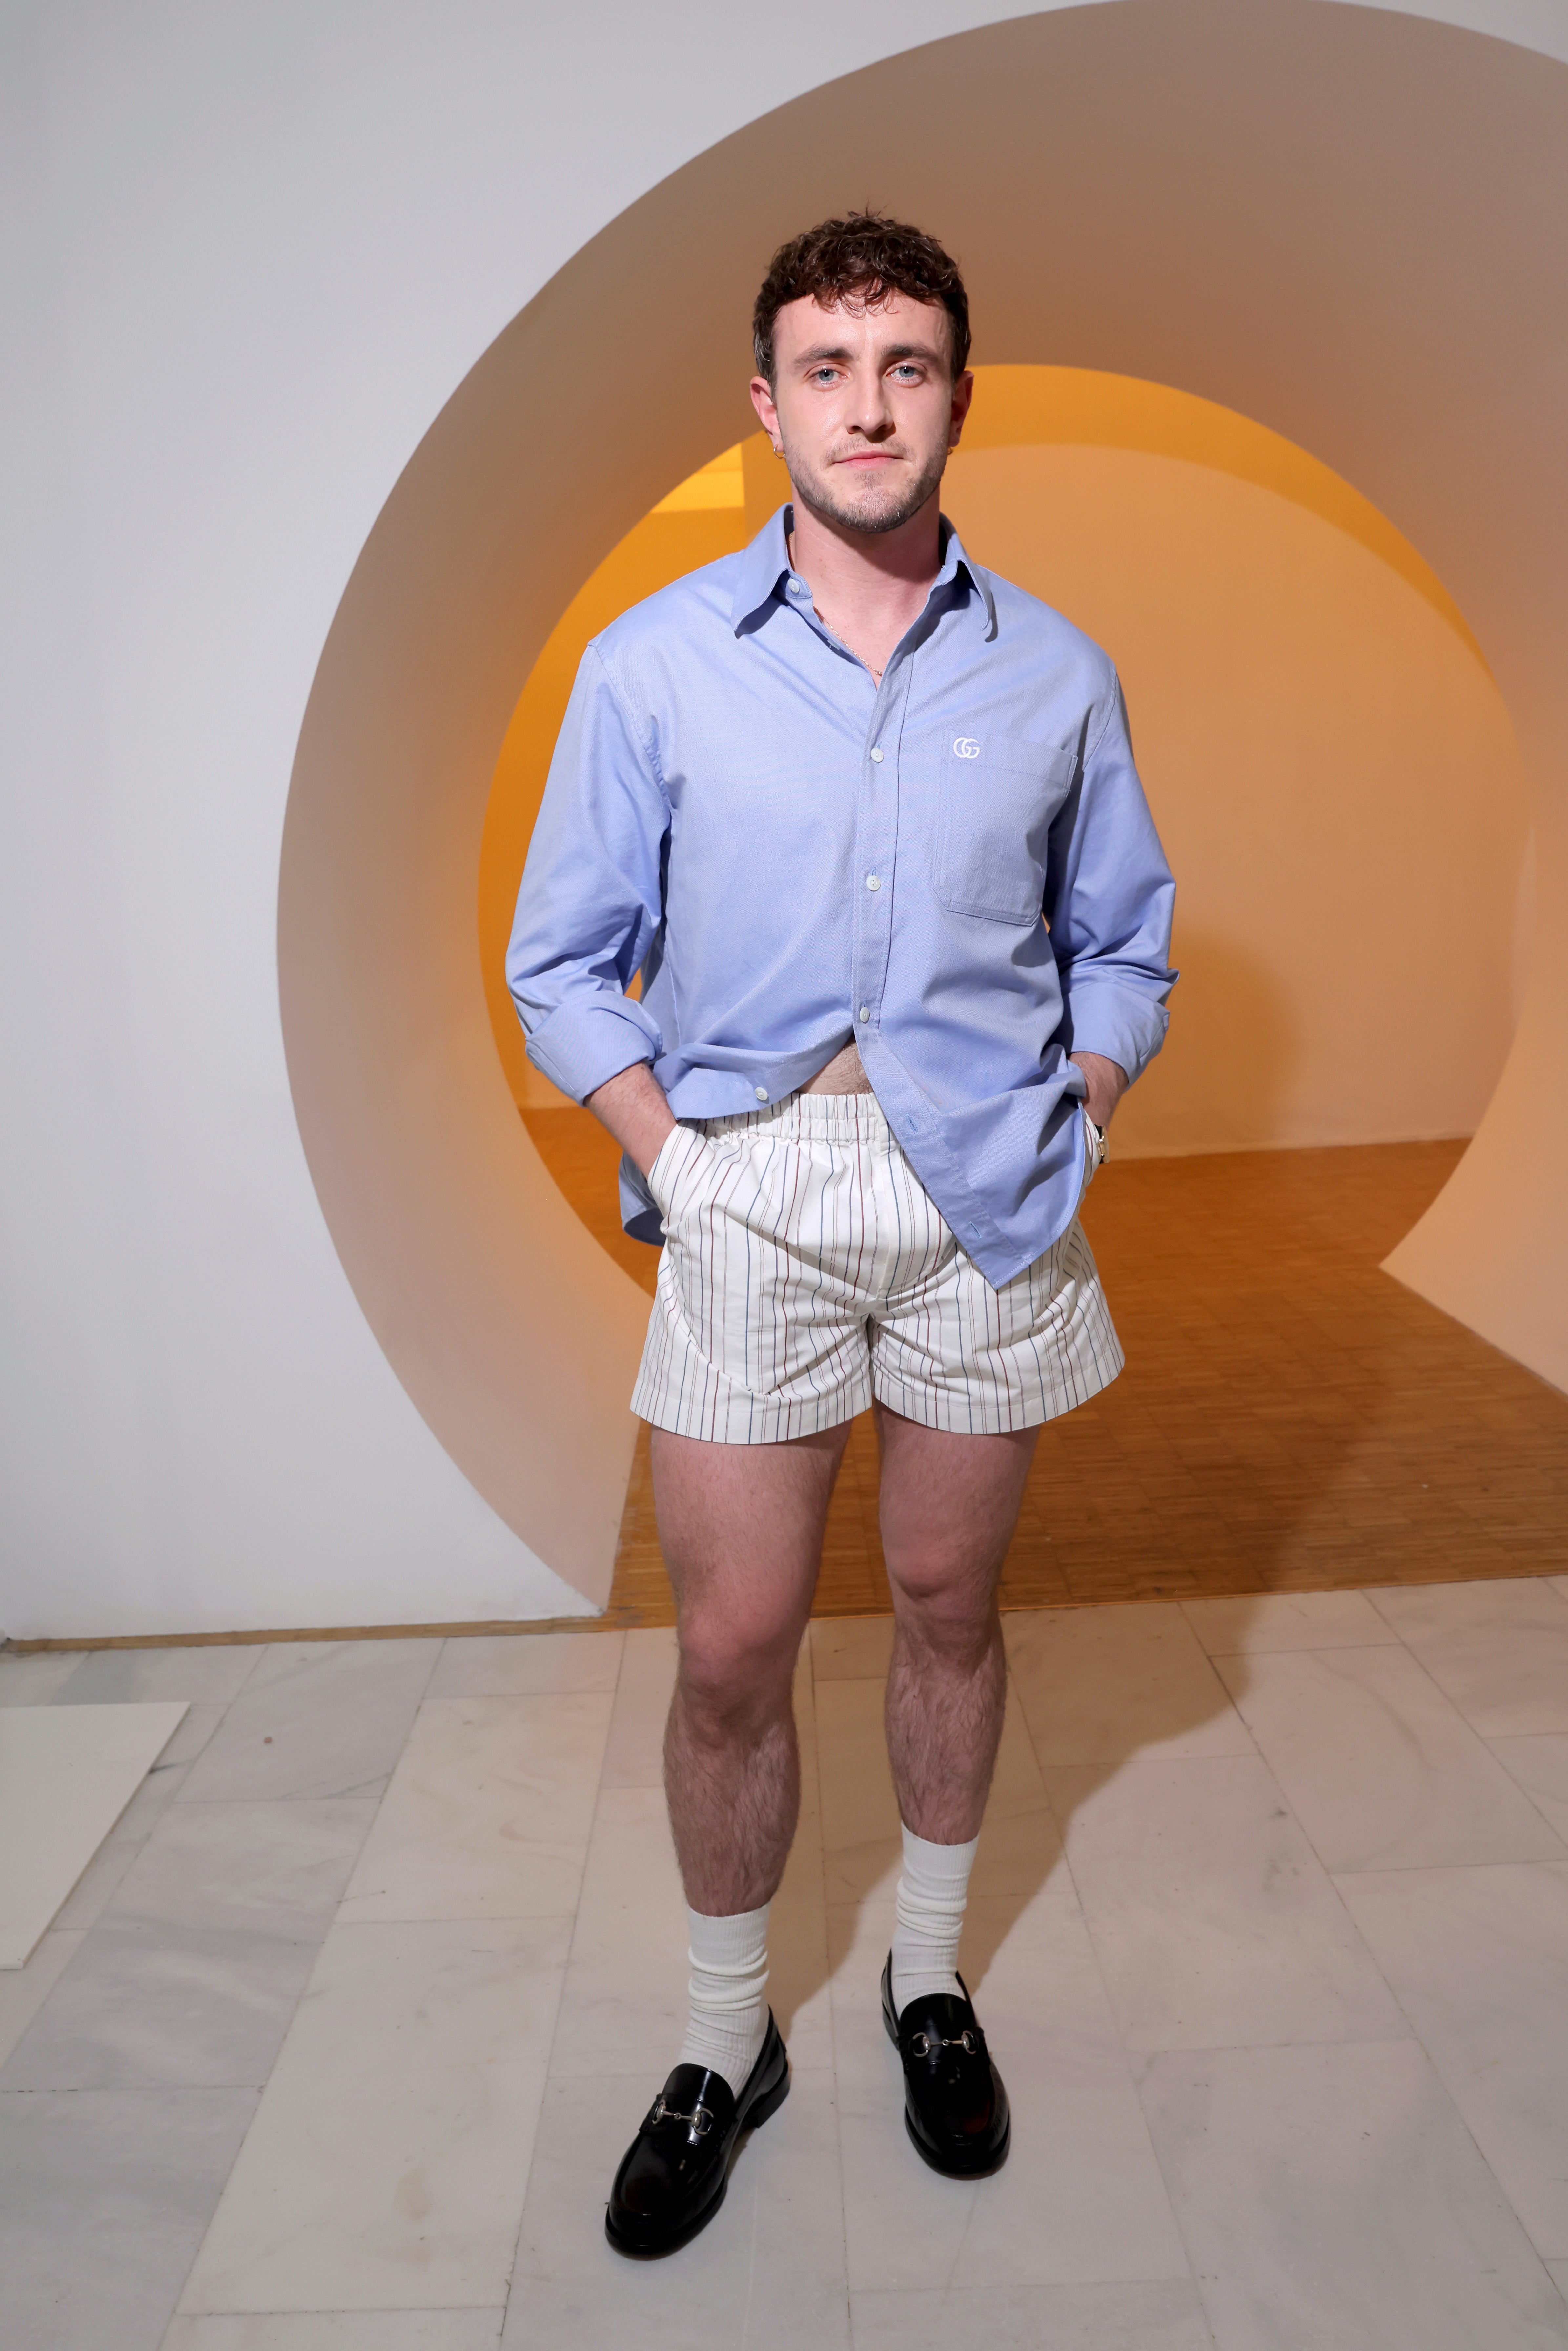 paul mescal, gucci, summer, who loves short shorts? paul mescal and a lot of men who should know better